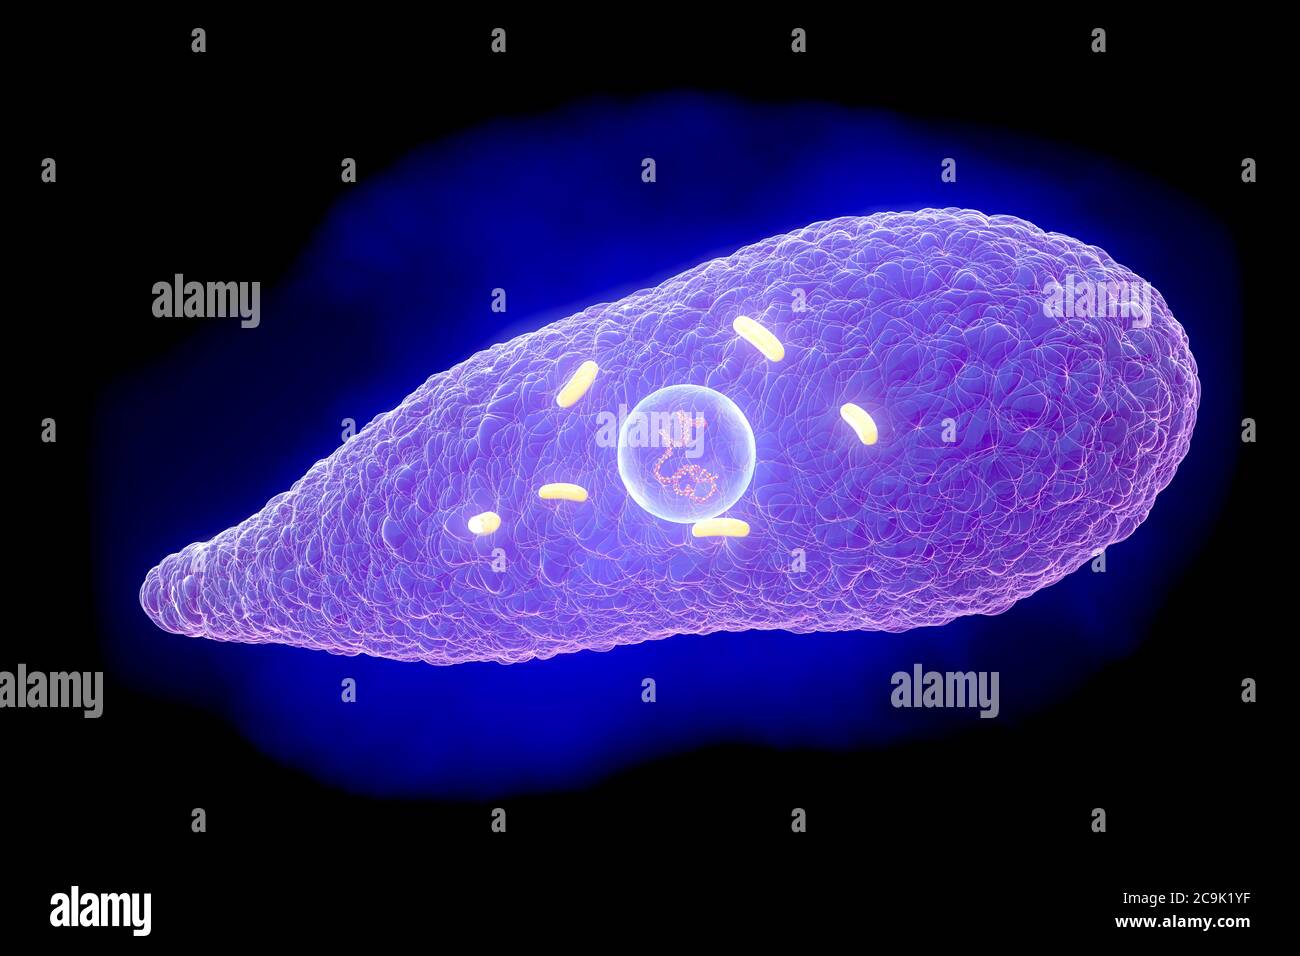 Clostridium perfringens bacterium, illustration. These are Gram-positive, endospore-forming, rod-shaped bacteria. This bacterium frequently occurs in Stock Photo